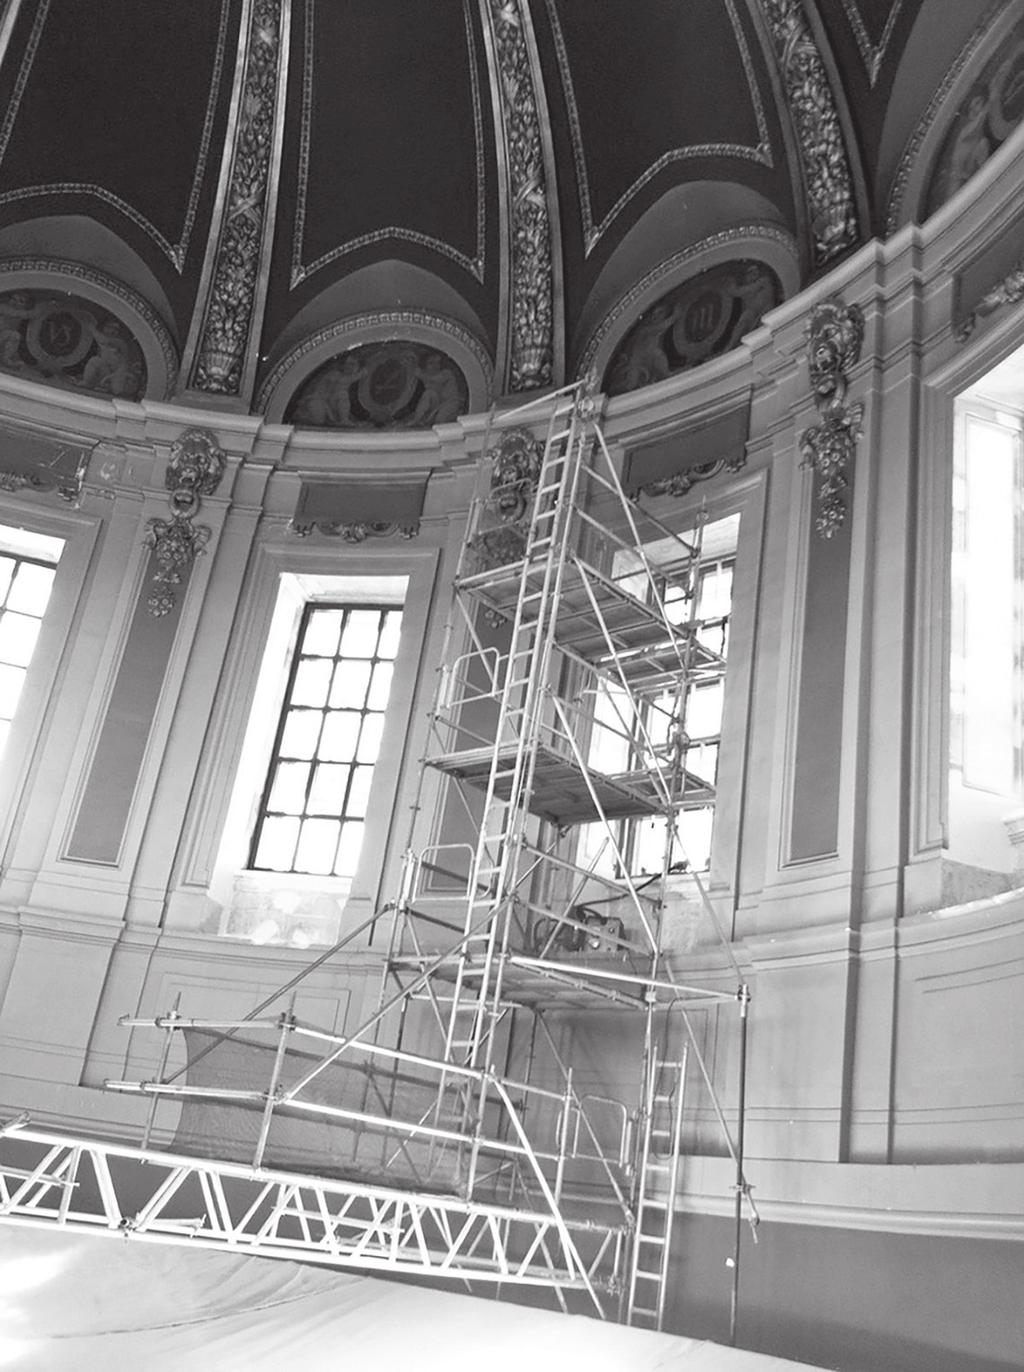 Figure 11 Testing of 12 new custom-built window units that were about 12 feet tall by 6 feet wide installed around the top of the rotunda.